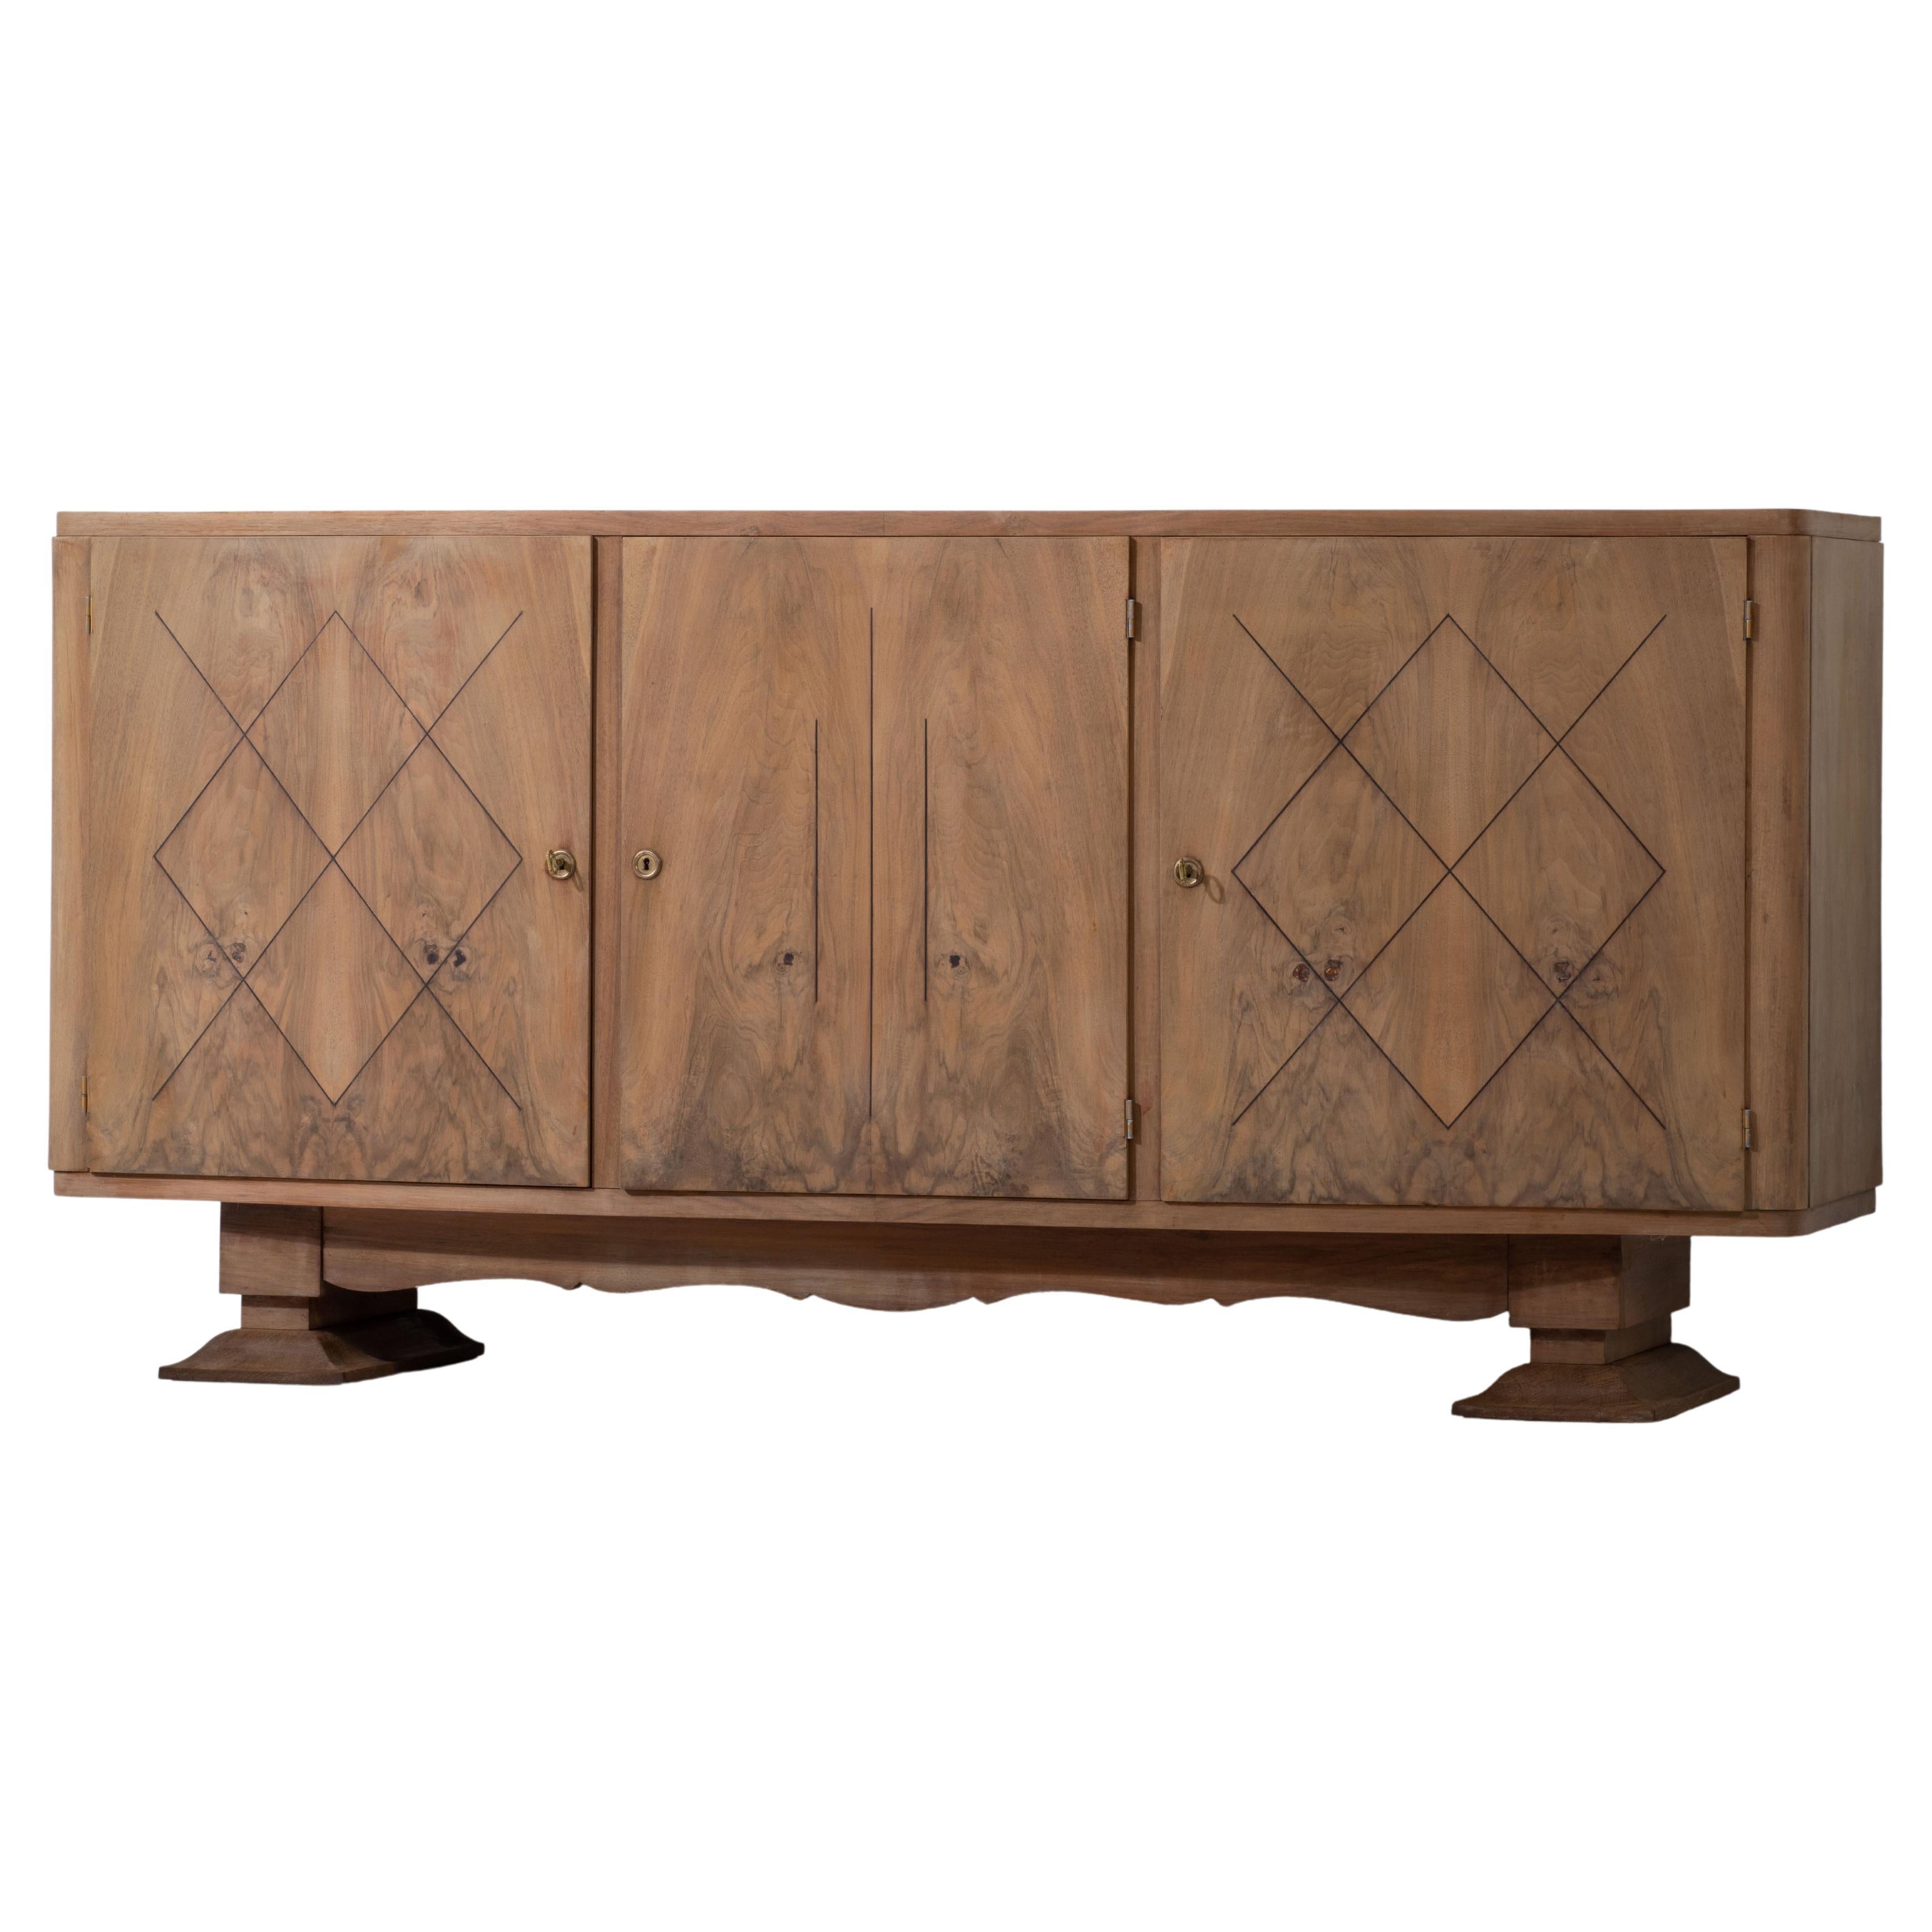 French Bleached Credenza, Walnut, France, 1940s For Sale